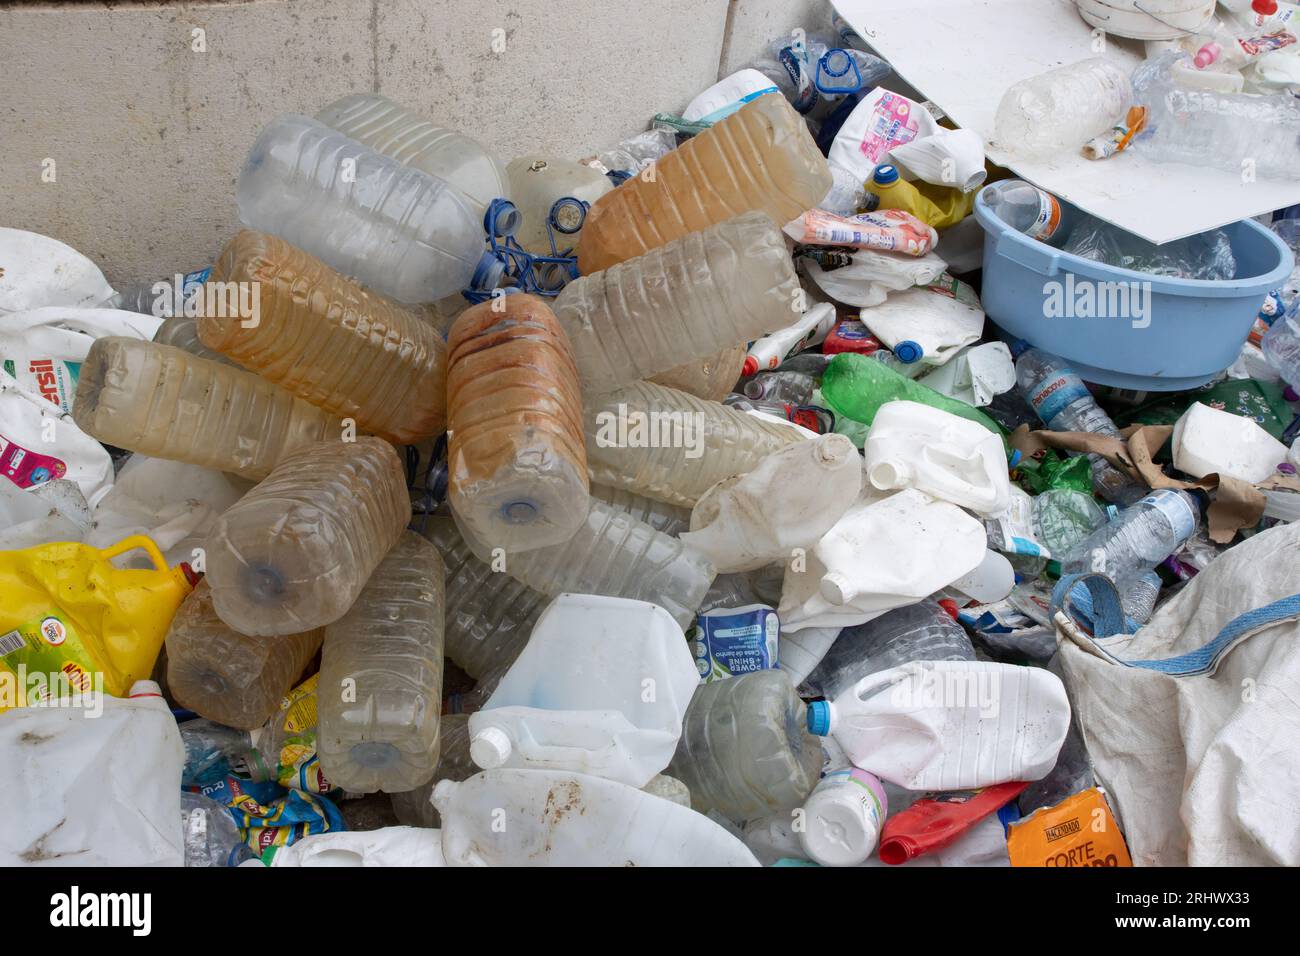 16 october 2022 Almada, Portugal: dirty five-liter plastic bottles in a recycling dump. Mid shot Stock Photo